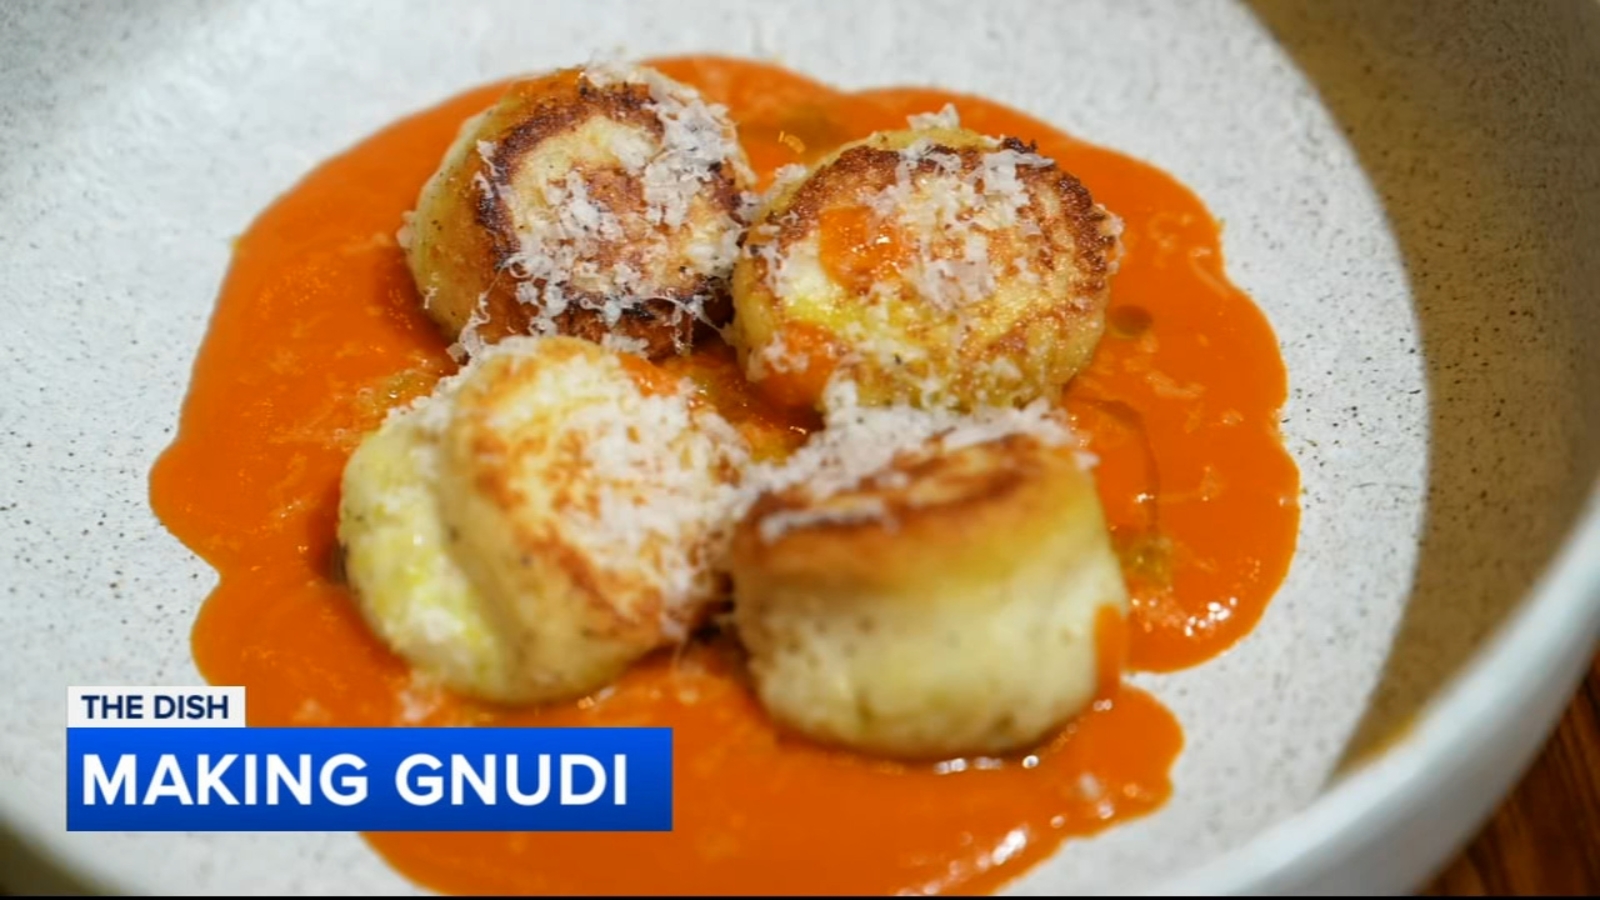  The Dish: Ricotta Gnudi recipe with Chef Antimo DiMeo from Bardea Food & Drink in Wilmington 